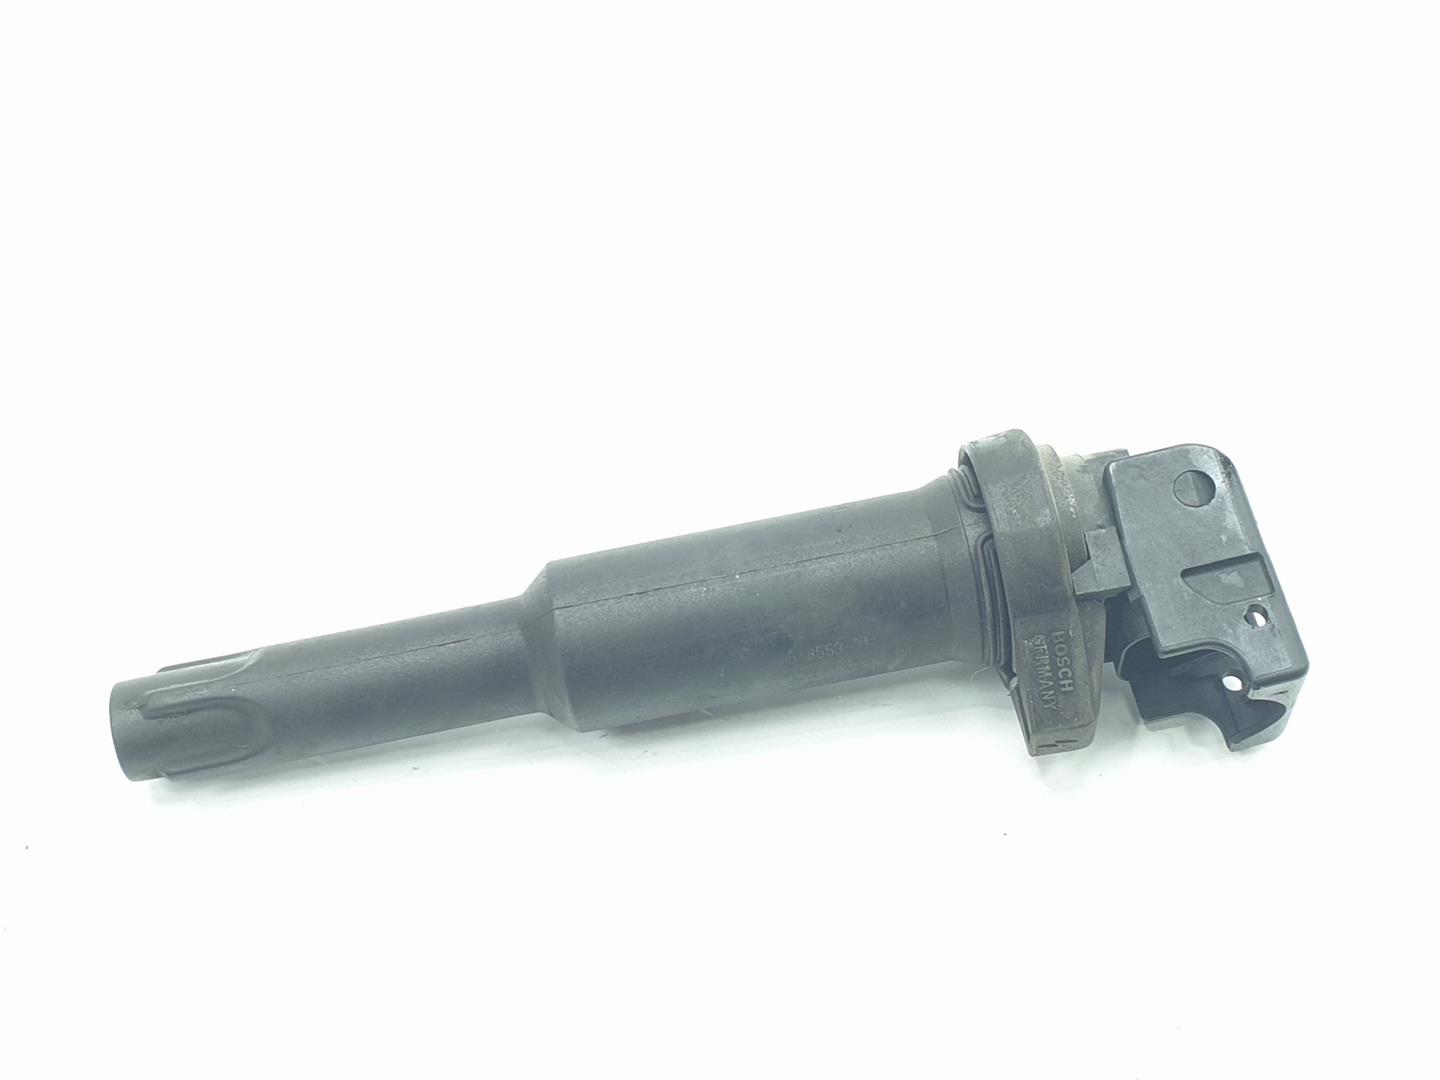 BMW 6 Series E63/E64 (2003-2010) High Voltage Ignition Coil 7548553, 7548553, 1111AA 24700087